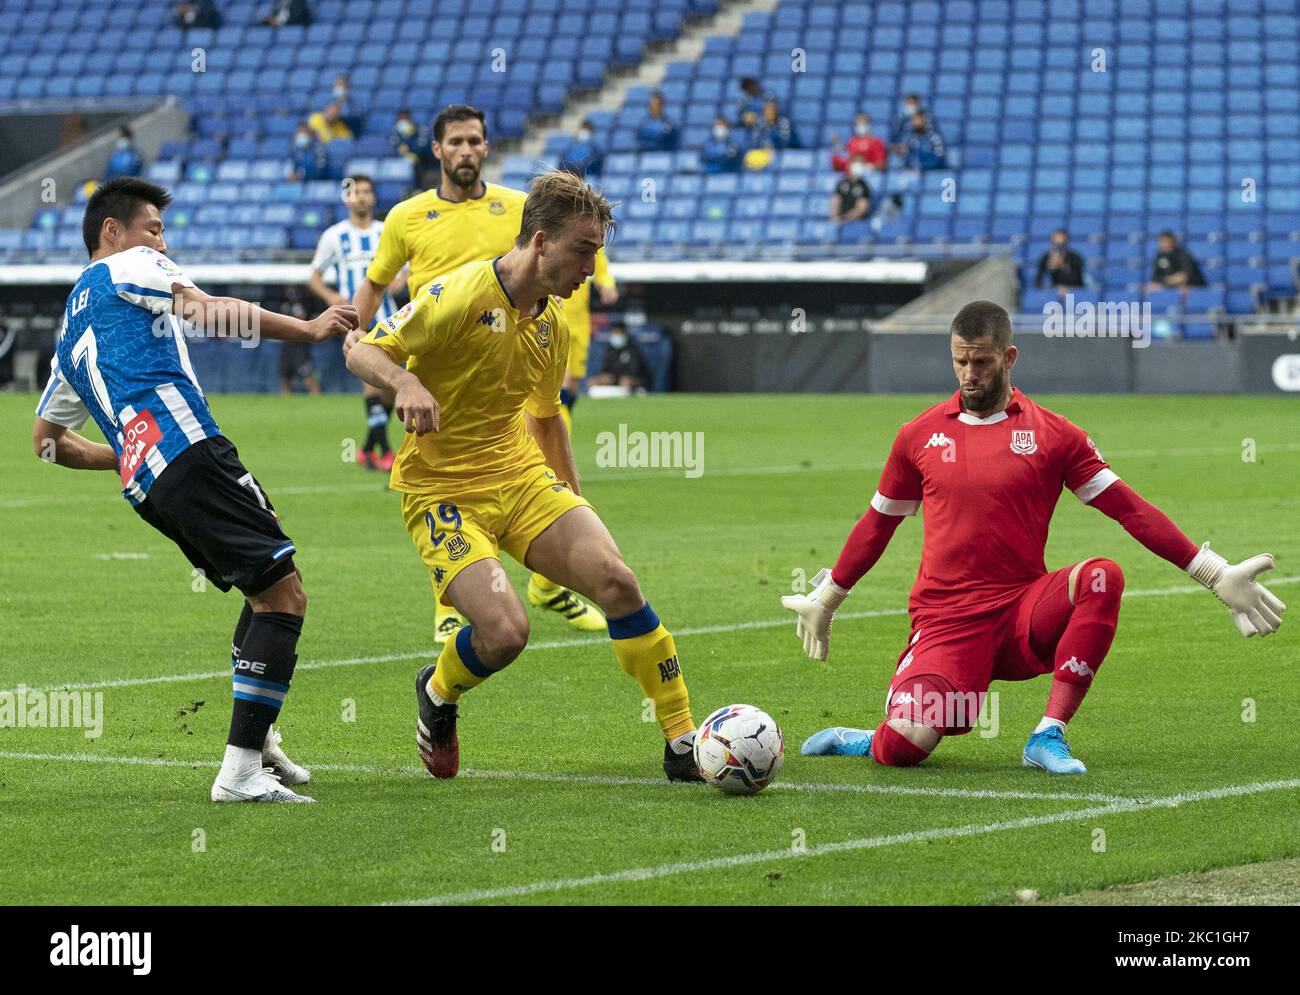 Wu Lei, Javier Castro and Daniel Jimenez during the match between RCD Espanyol and A.D. Alcorcon, corresponding to the week 5 ofvthe Liga Smartbank, played at the RCDE Stadium, on 10th October 2020, in Barcelona, Spain. (Photo by Urbanandsport/NurPhoto) Stock Photo